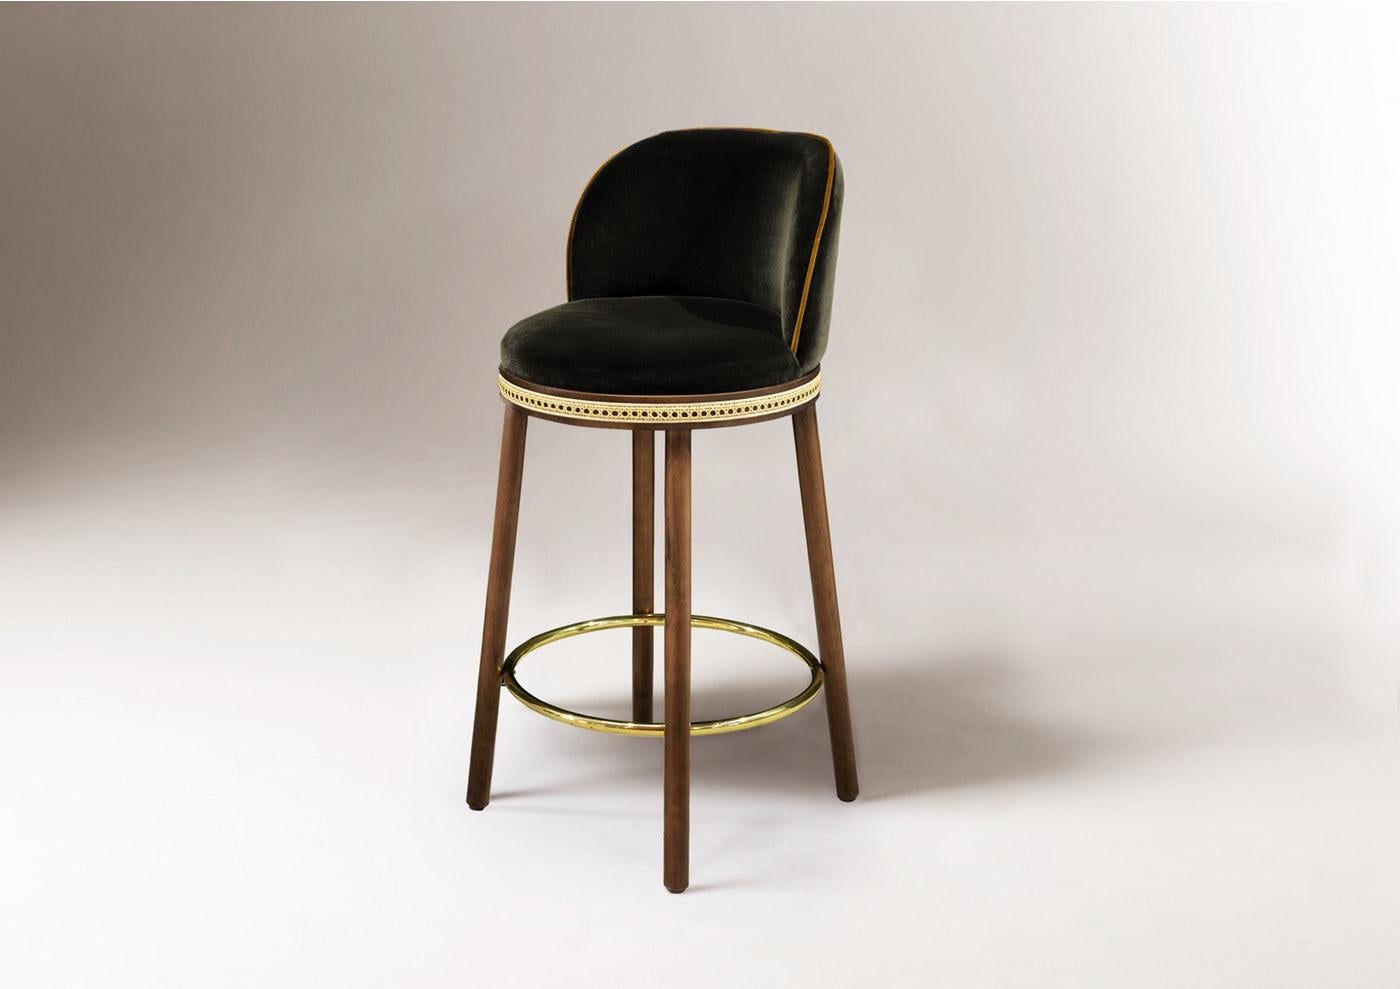 Alma Bar Chair by Dooq
Dimensions:
W 46 cm 18”
D 51 cm 20”
H 100 cm 39”
seat height: 75 cm 30”
Materials: upholstery fabric or leather; structure solid wood feet lacquered MDF or solid wood rattan natural rattan. COM with natural walnut or natural